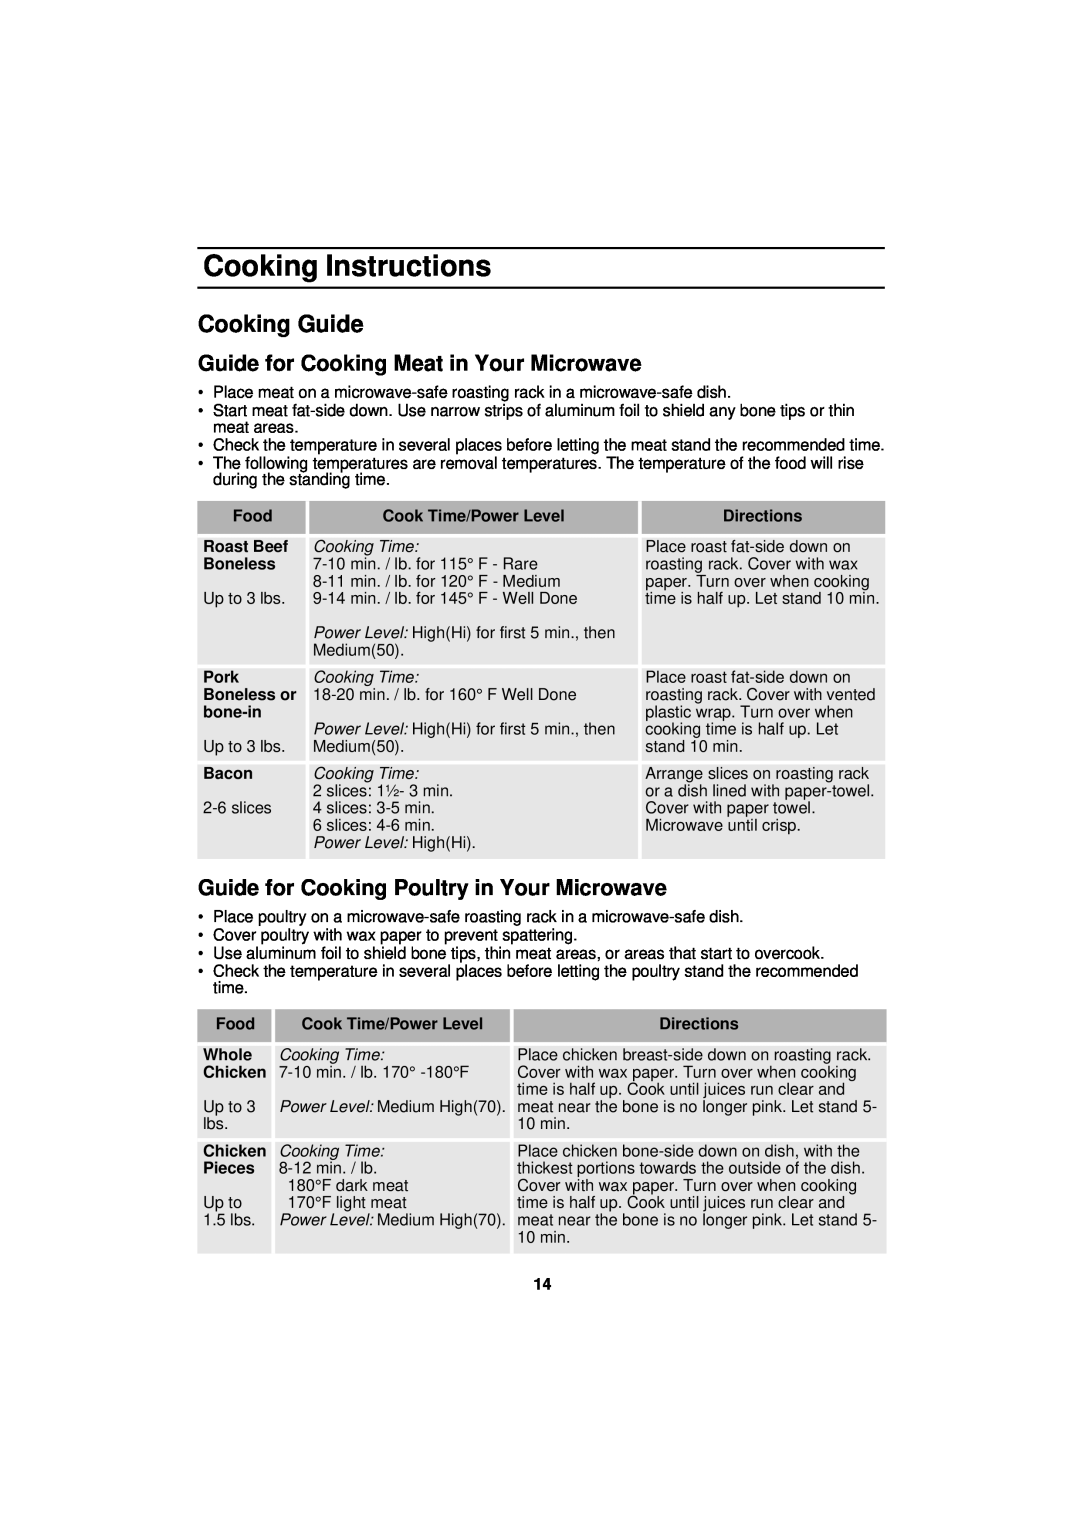 Samsung DE68-01931A-01 Cooking Guide, Guide for Cooking Meat in Your Microwave, Cooking Instructions, Cooking Time, slices 